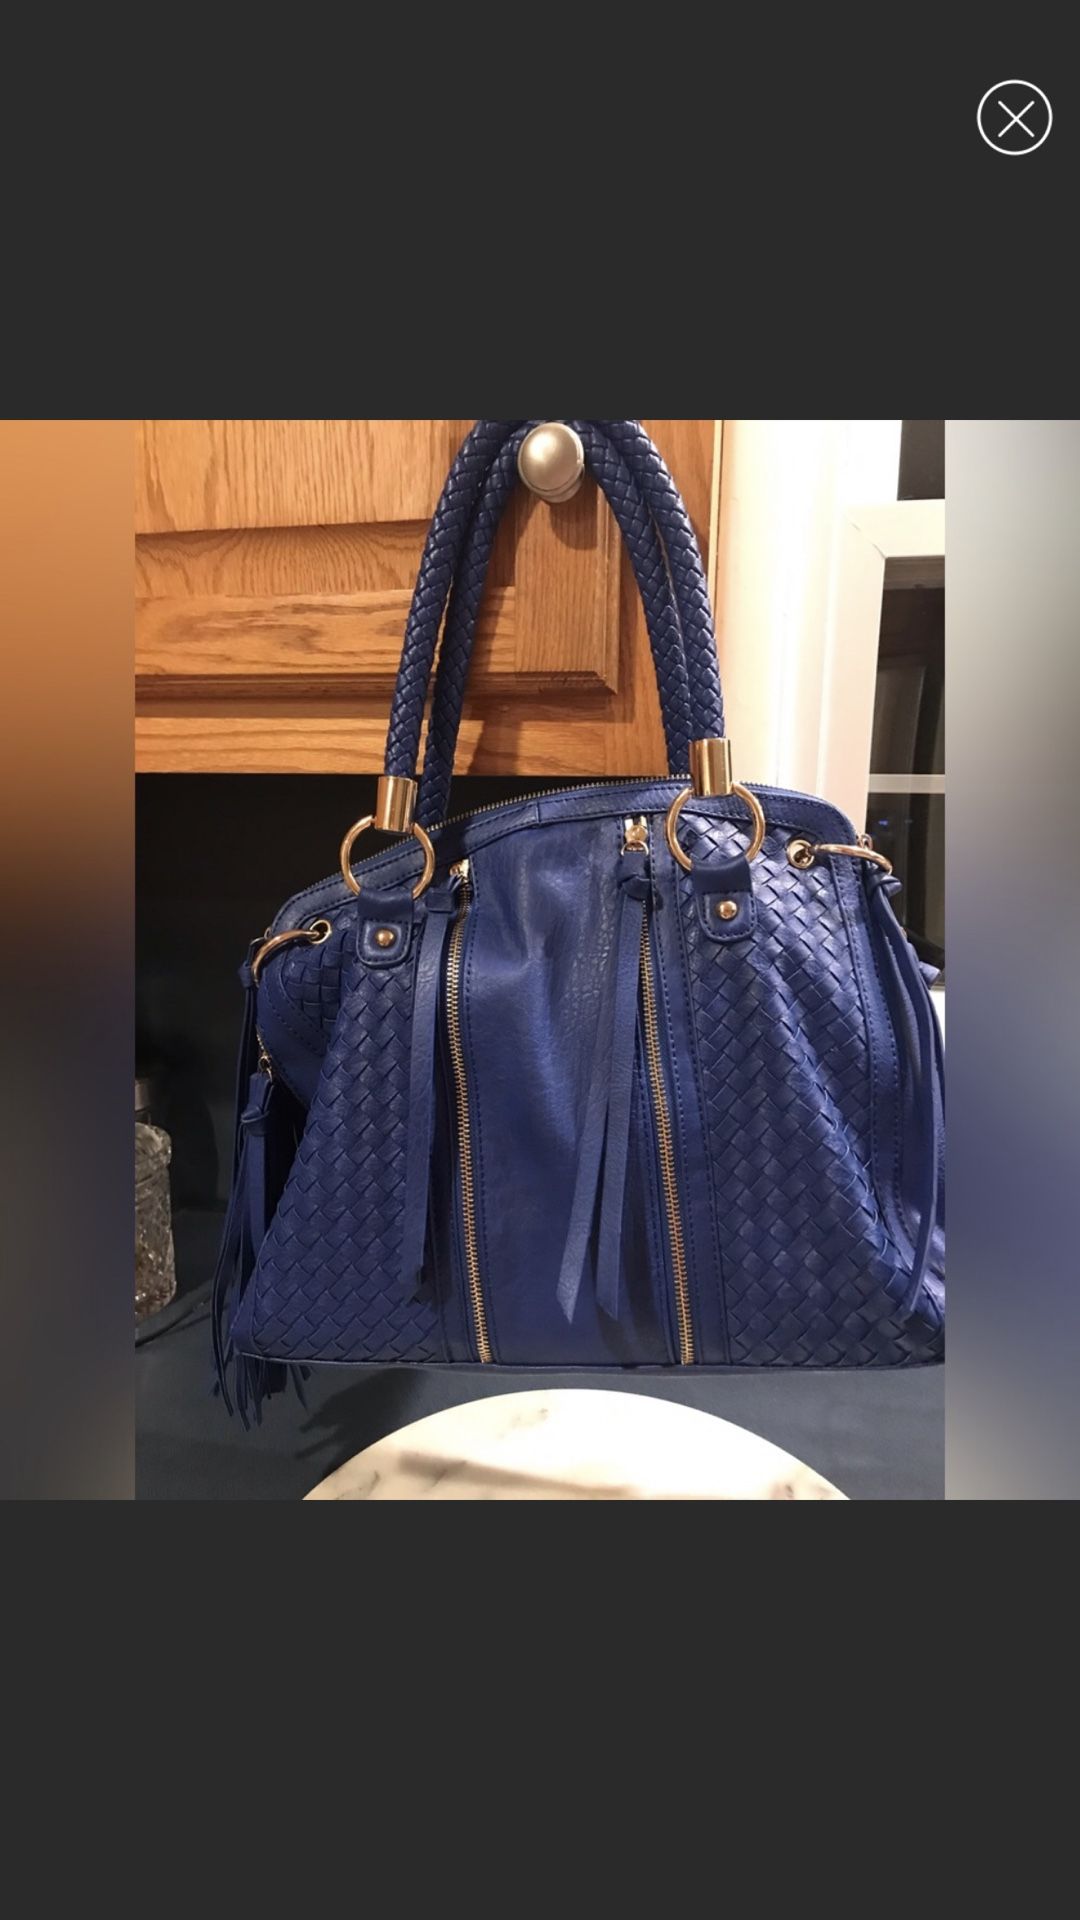 Urban Expressions Blue Bag With Gold Hardware